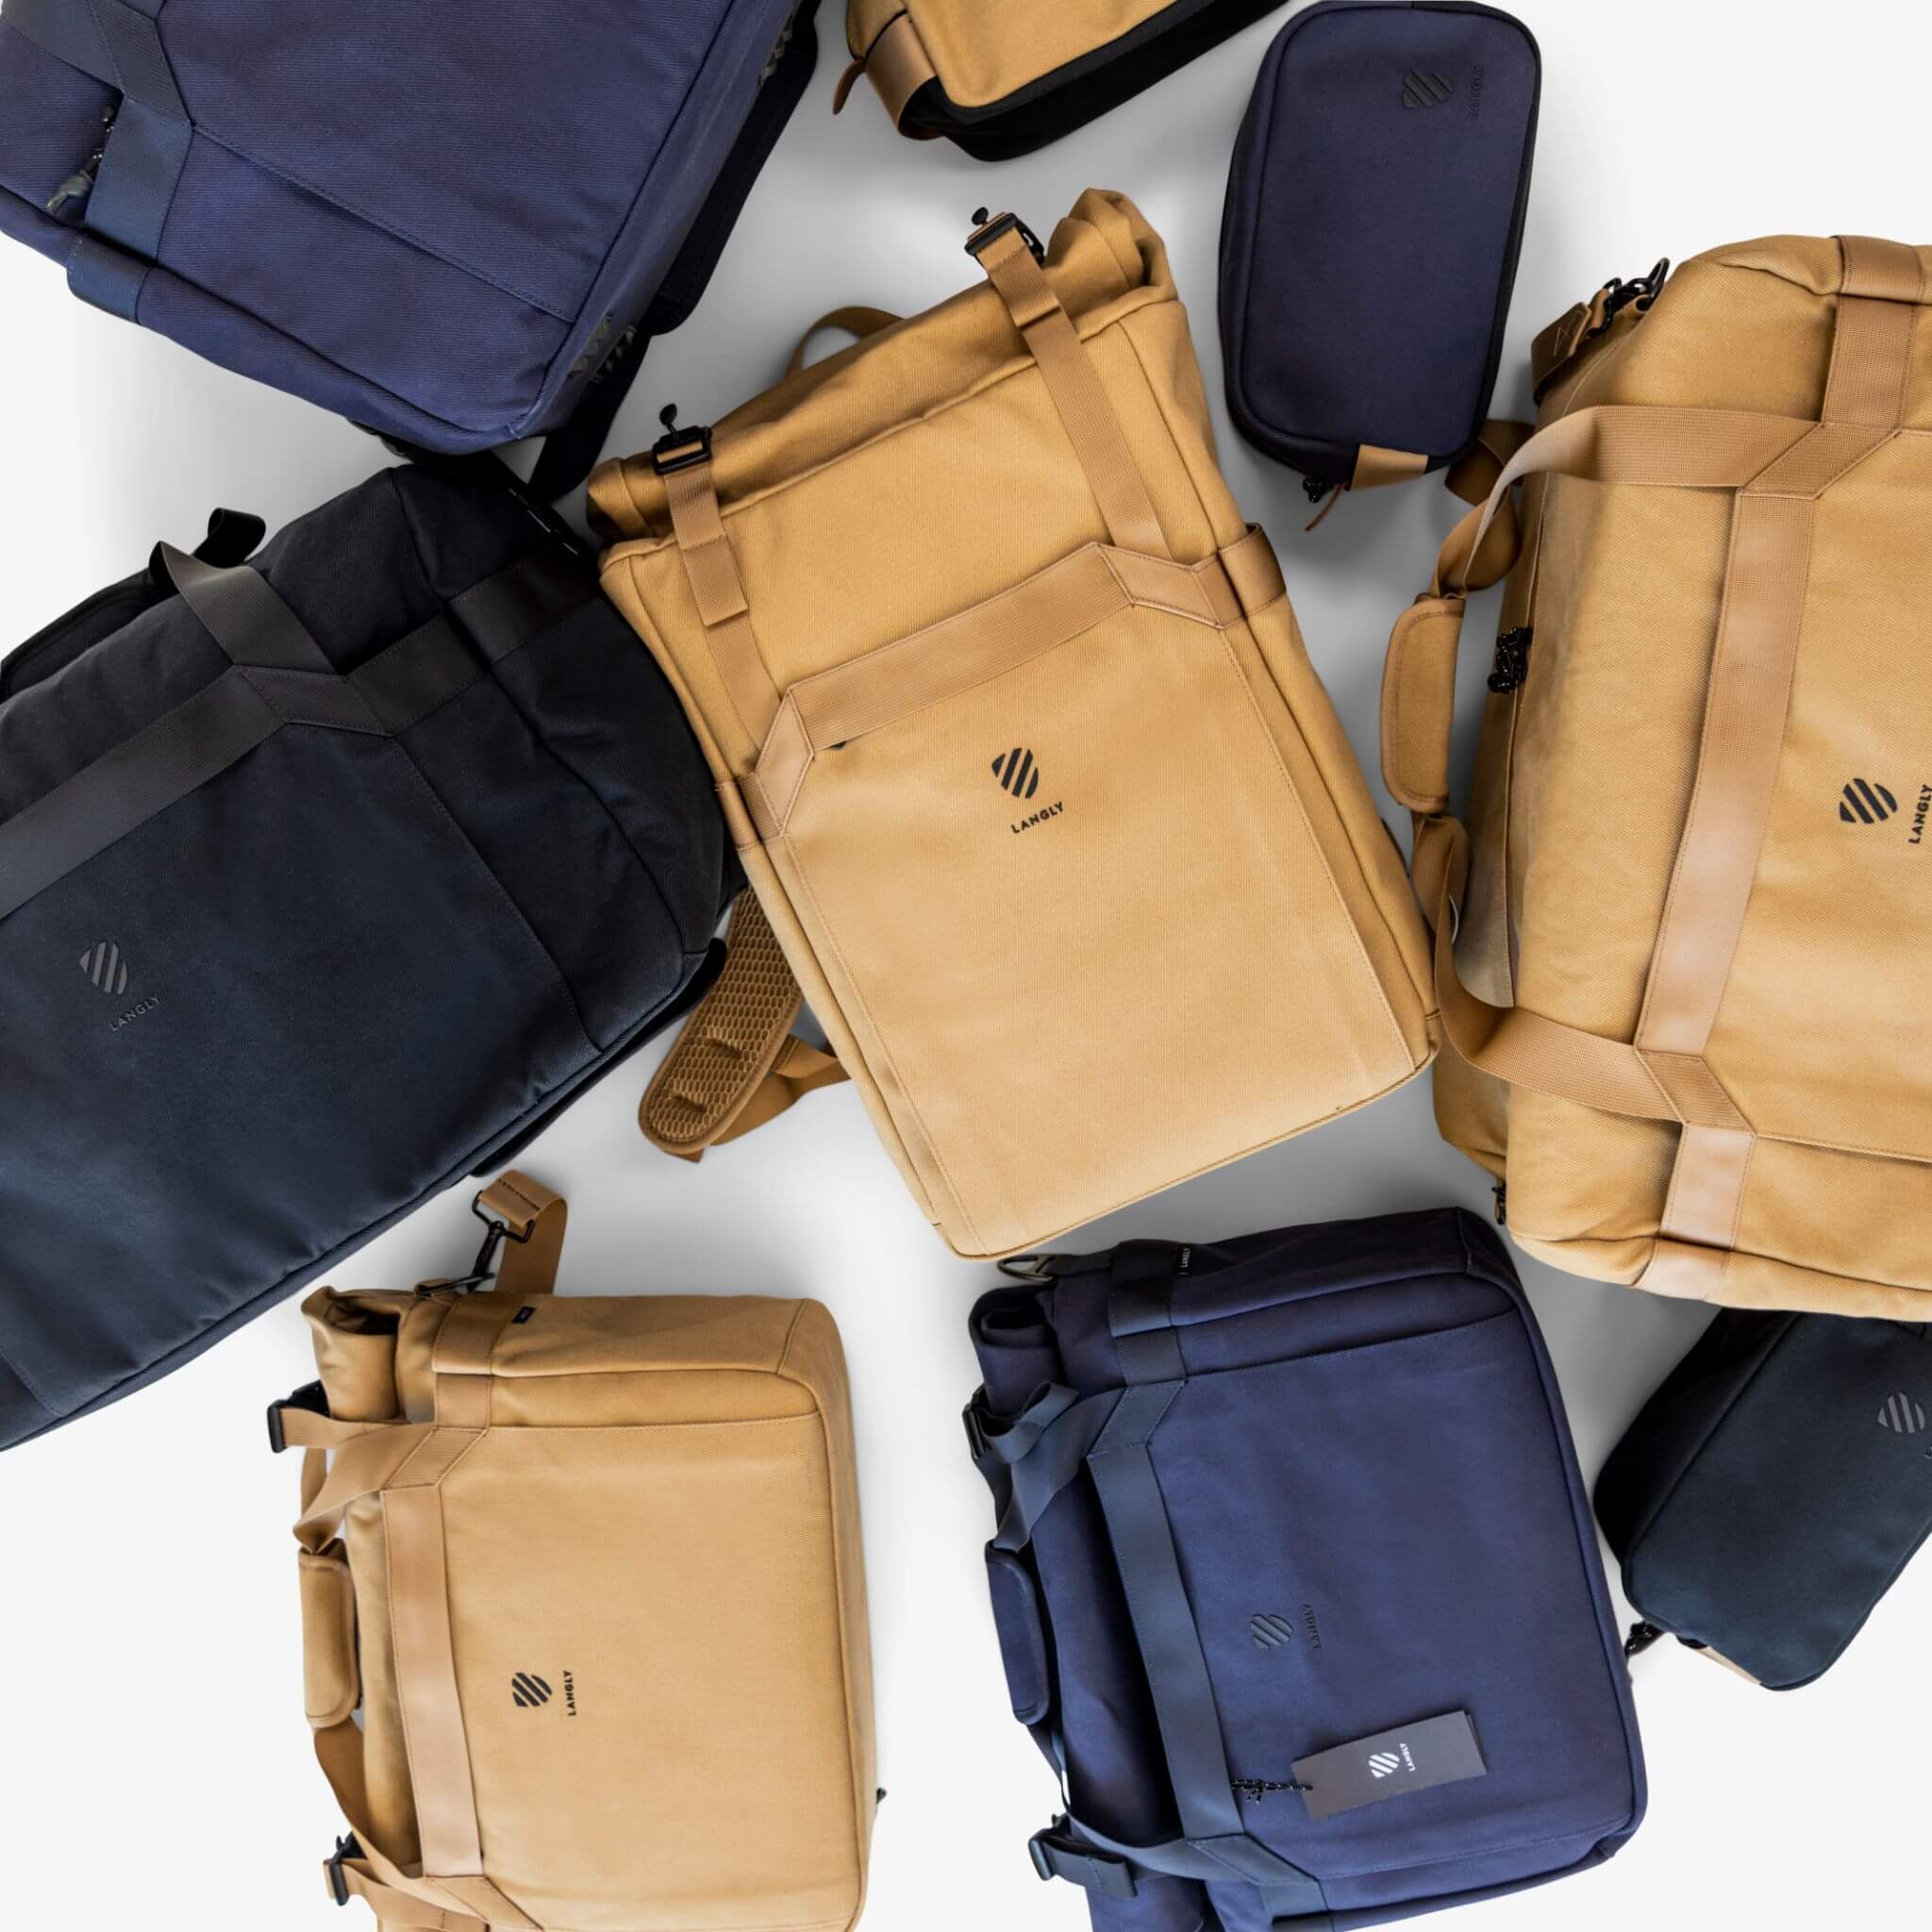 New Weekender Camera Bag & Luggage Collection